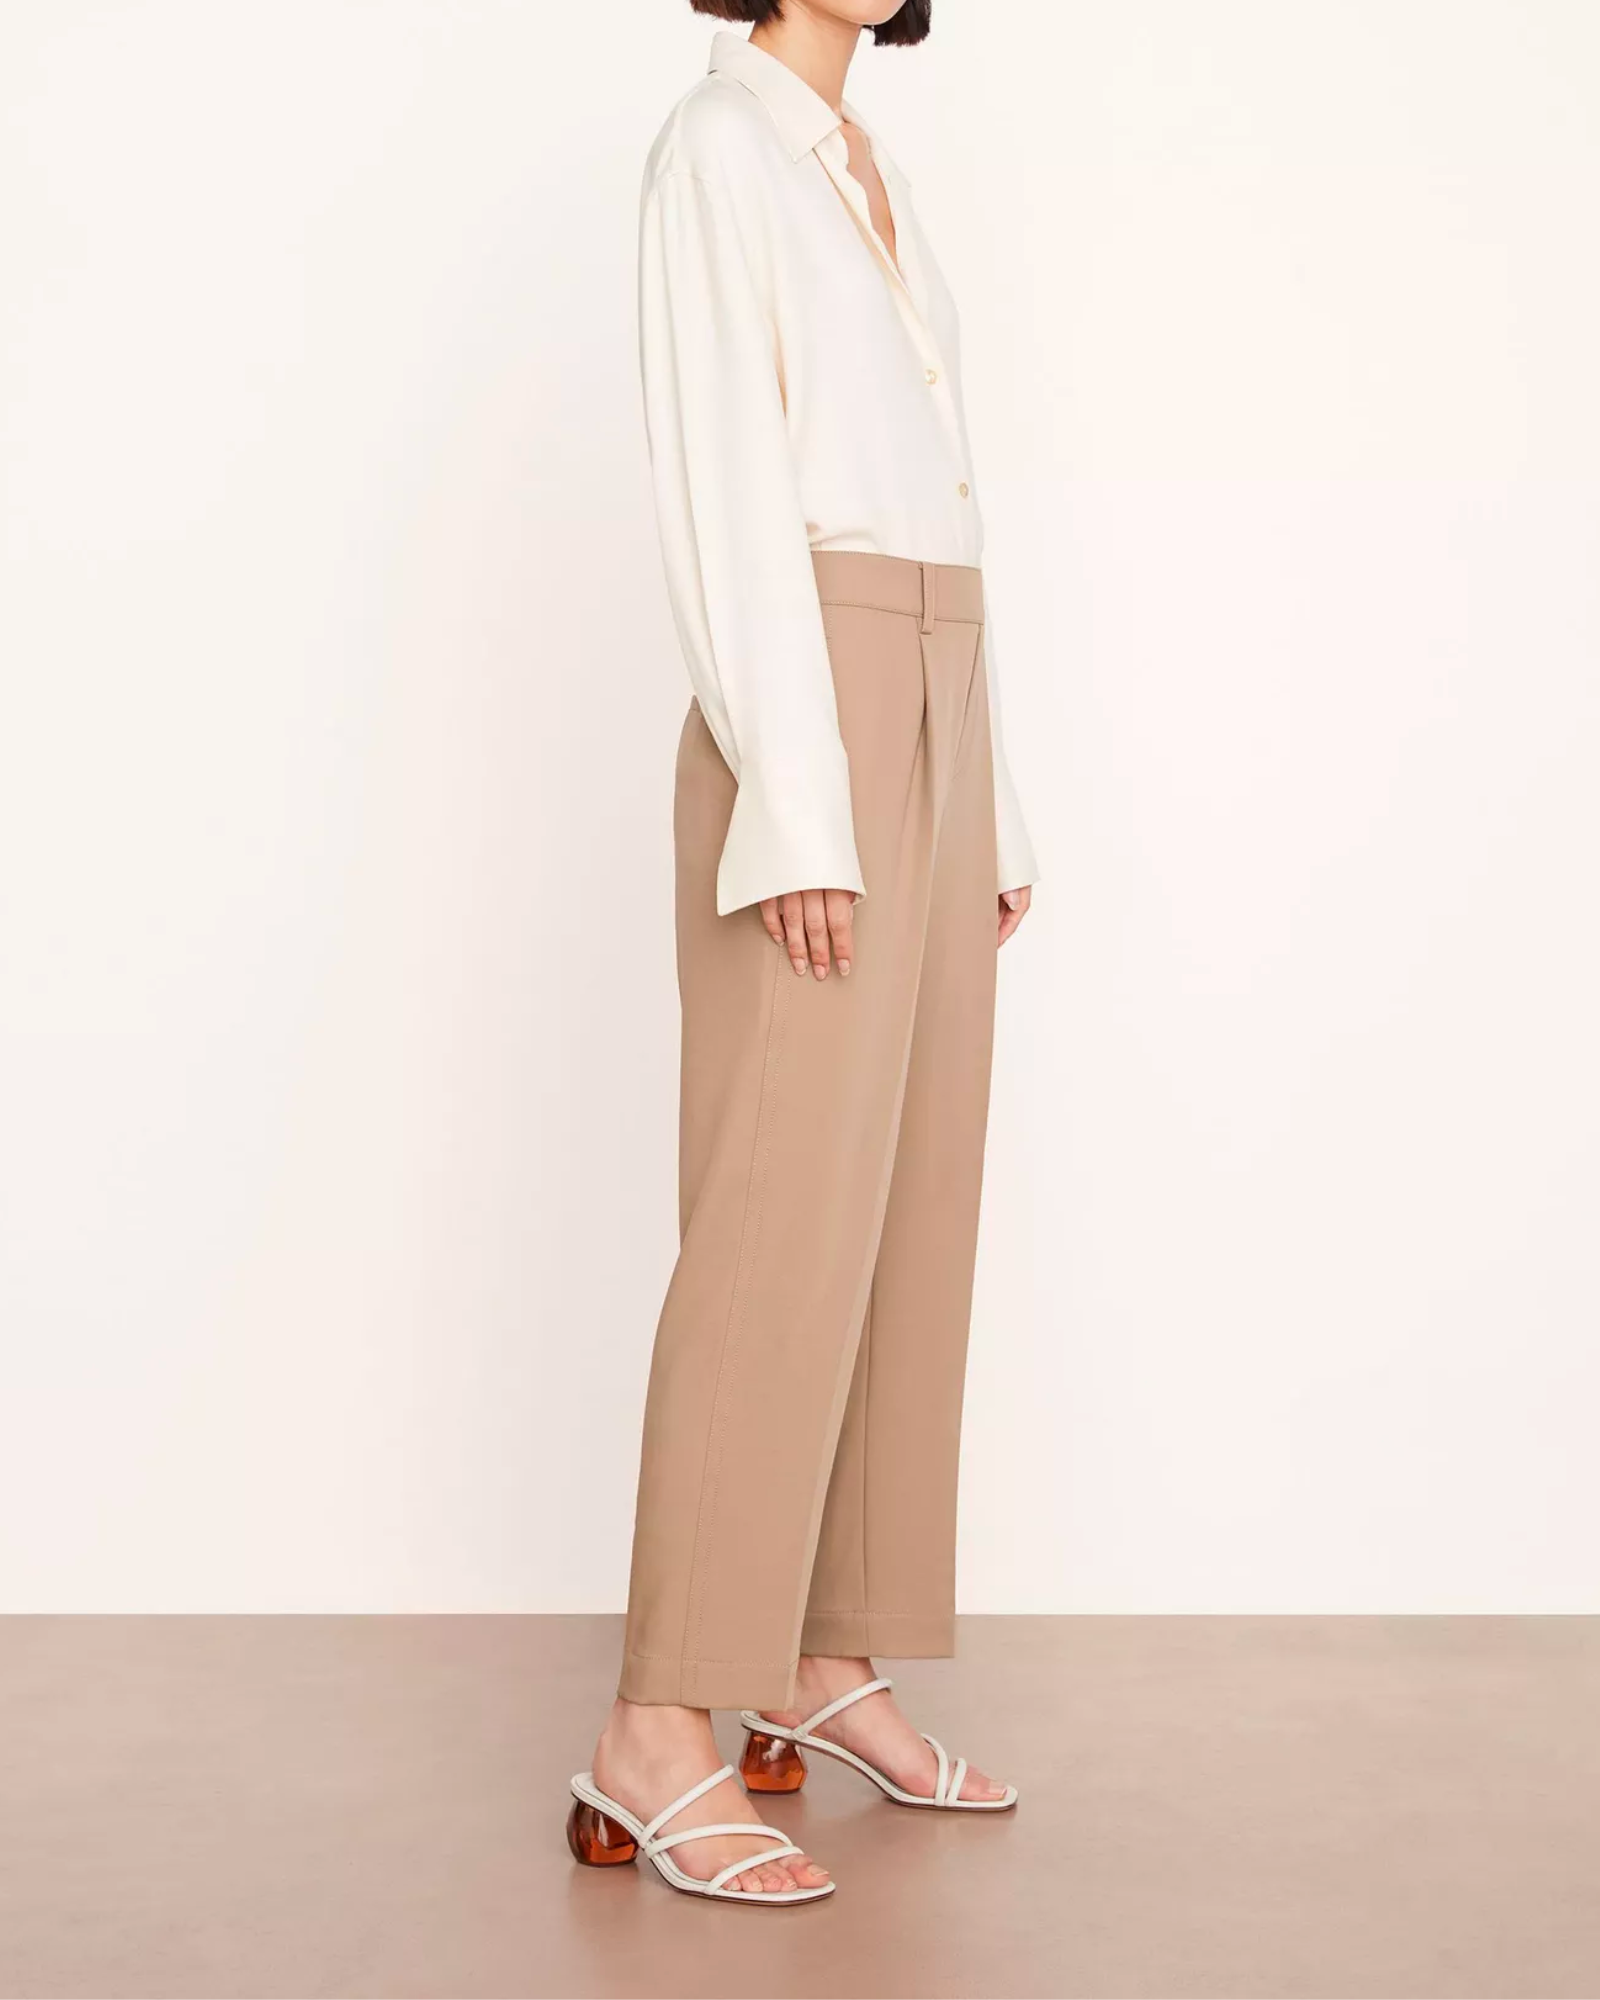 Vince Tapered Pull on Pant in Sandshell